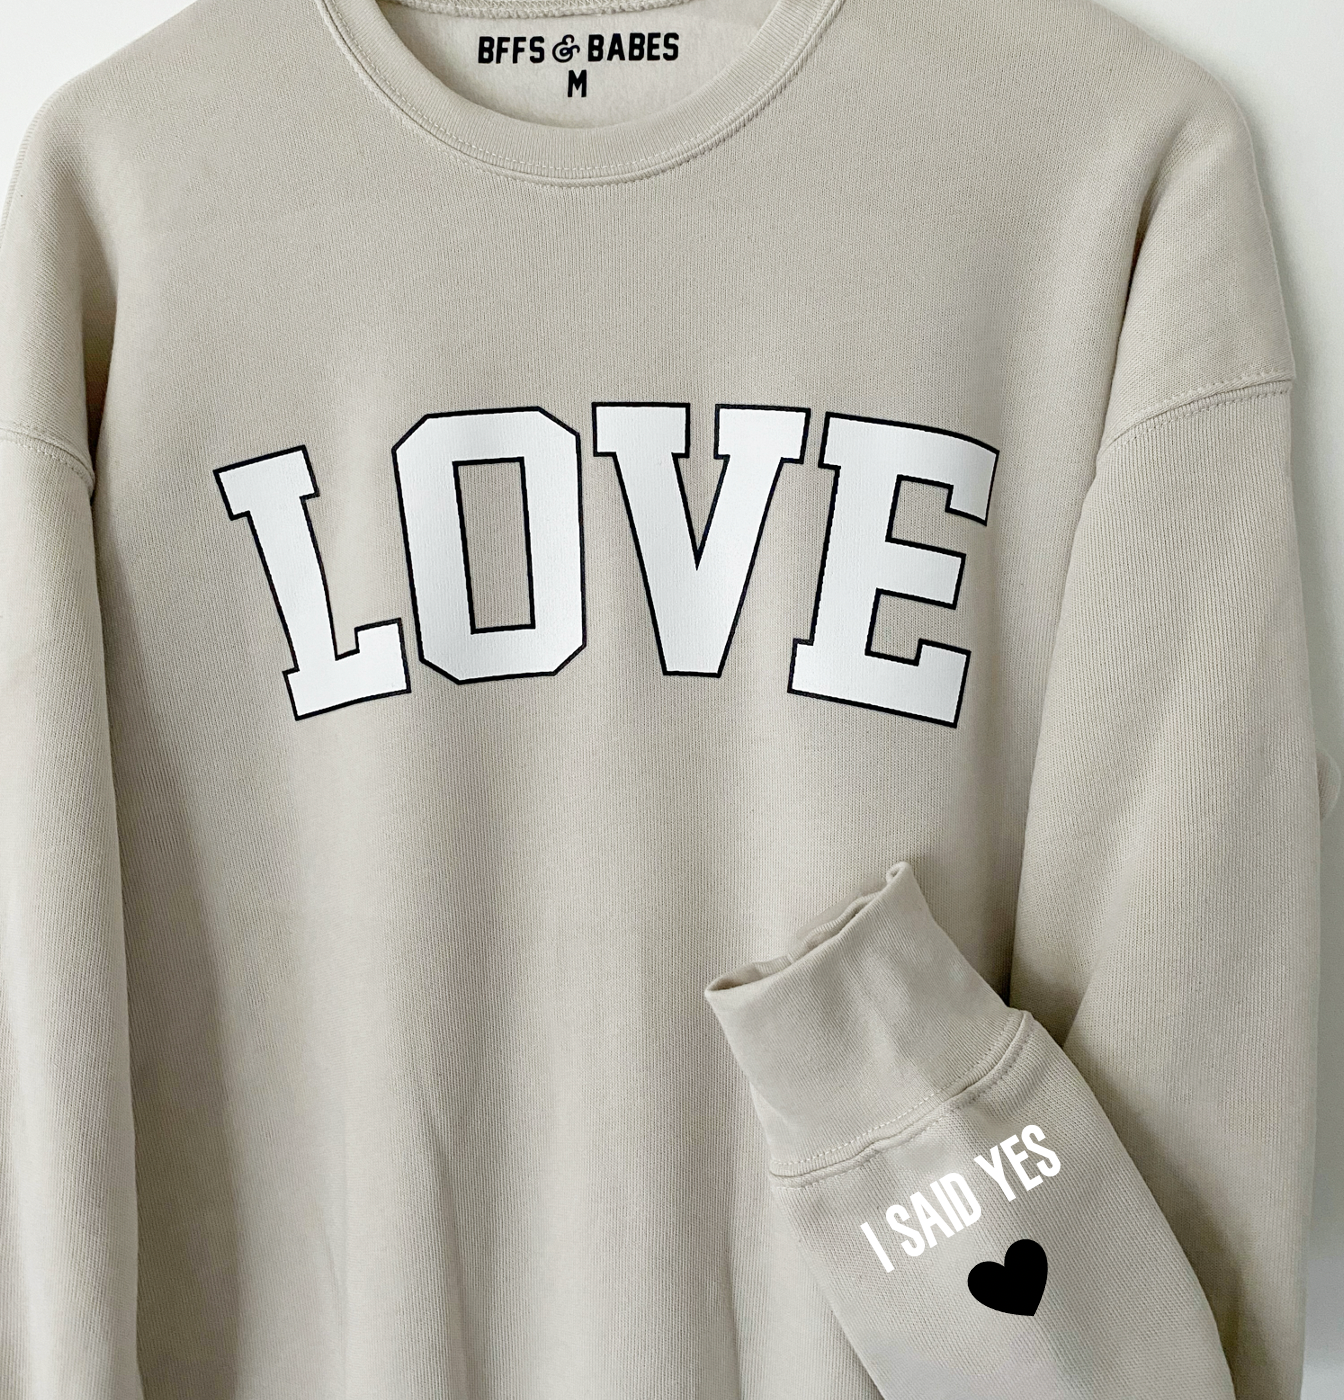 LOVE ON THE CUFF ♡ neutral love sweatshirt with personalized cuff